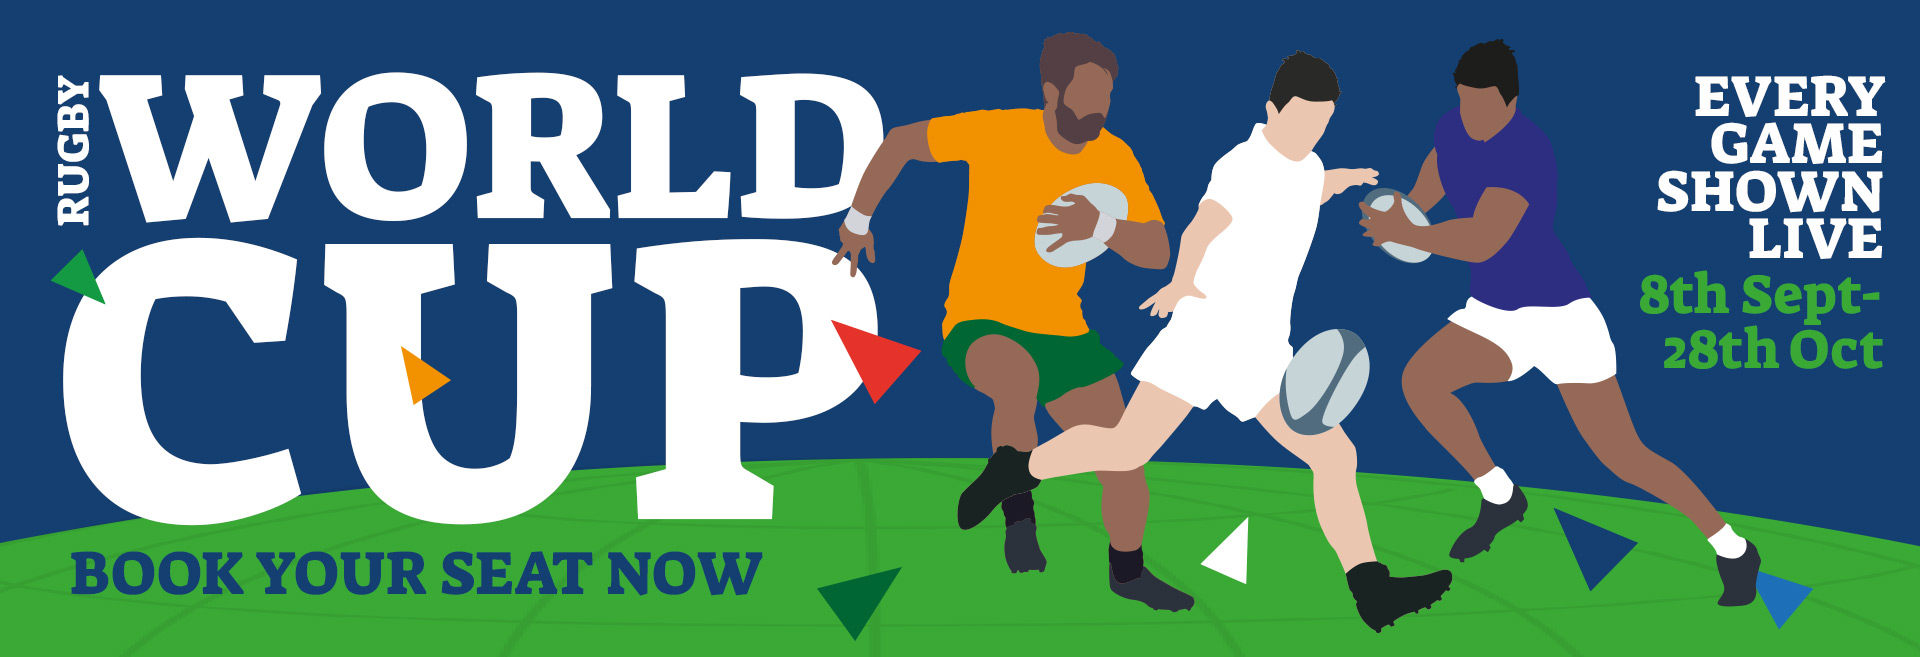 Watch the Rugby World Cup at The Goat